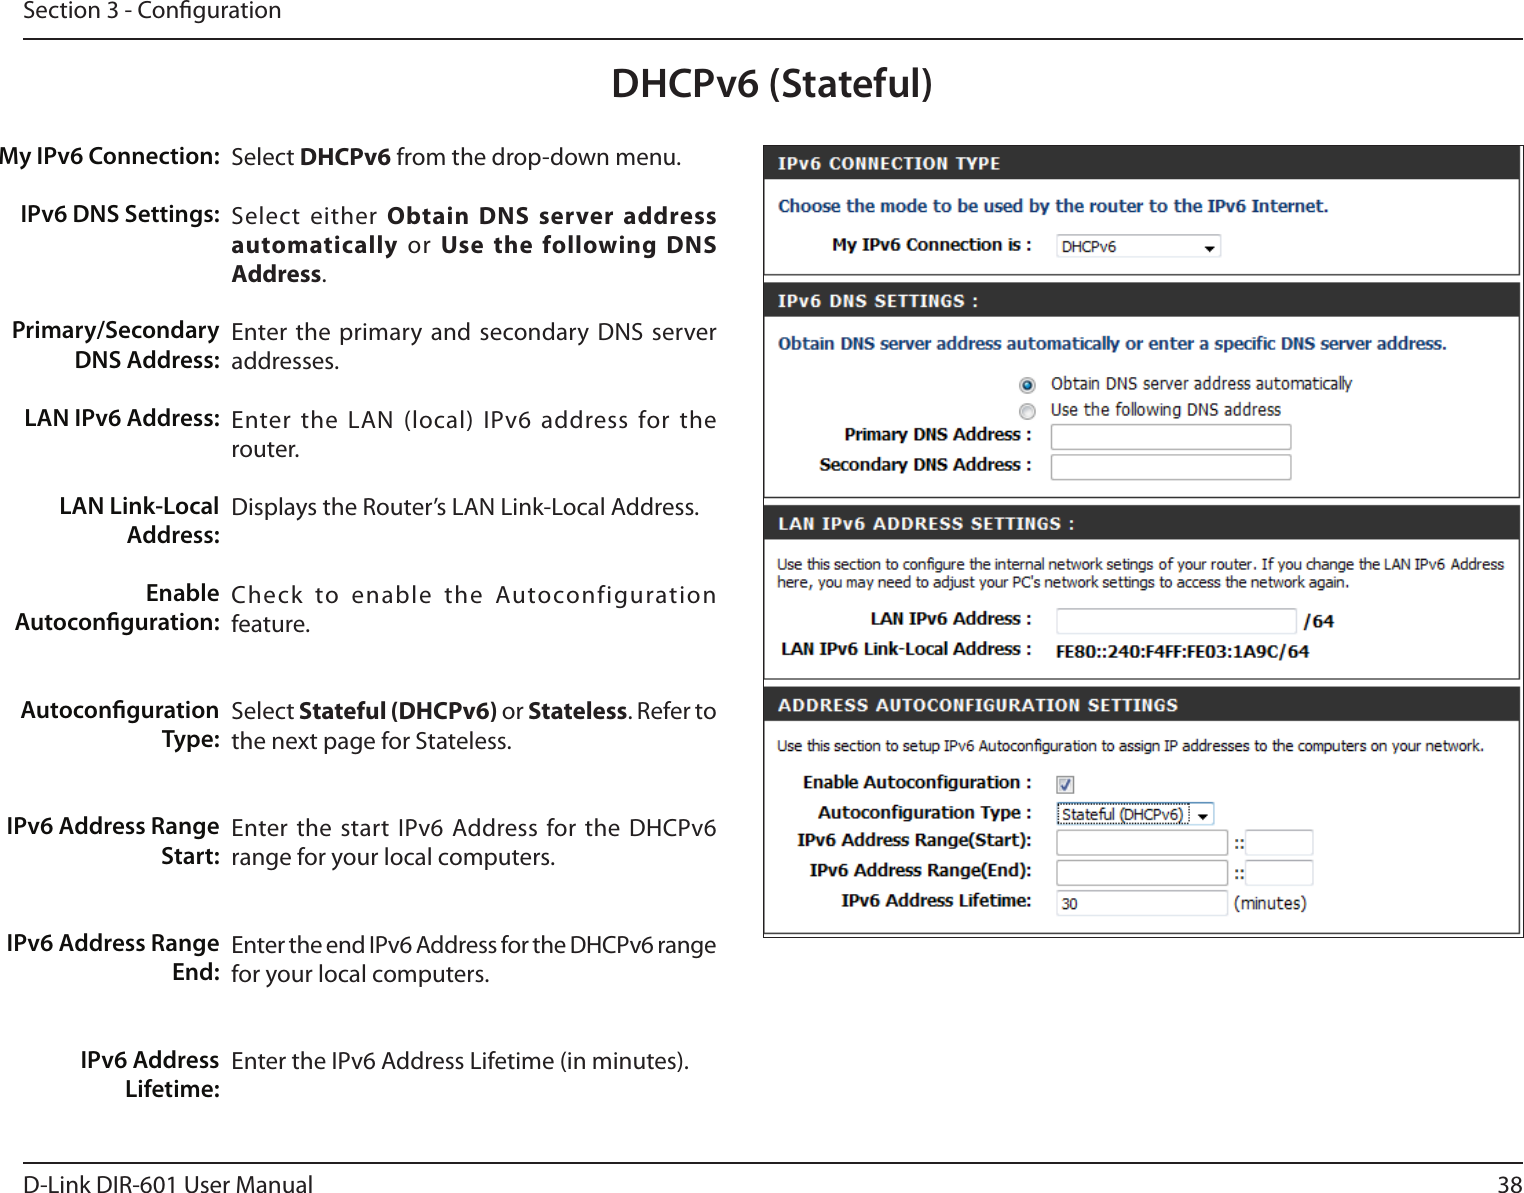 38D-Link DIR-601 User ManualSection 3 - CongurationDHCPv6 (Stateful)Select DHCPv6 from the drop-down menu.Select  either ObtainDNSserveraddressautomatically  or  Usethe followingDNSAddress.Enter the primary and secondary DNS server addresses. Enter the LAN (local)  IPv6 address for the router. Displays the Router’s LAN Link-Local Address.Check  to  enable  the  Autoconfiguration feature.Select Stateful(DHCPv6) or Stateless. Refer to the next page for Stateless.Enter the start IPv6  Address for the DHCPv6 range for your local computers.Enter the end IPv6 Address for the DHCPv6 range for your local computers.Enter the IPv6 Address Lifetime (in minutes).My IPv6 Connection:IPv6 DNS Settings:Primary/Secondary DNS Address:LAN IPv6 Address:LAN Link-Local Address:Enable Autoconguration:Autoconguration Type:IPv6 Address Range Start:IPv6 Address Range End:IPv6 Address Lifetime: